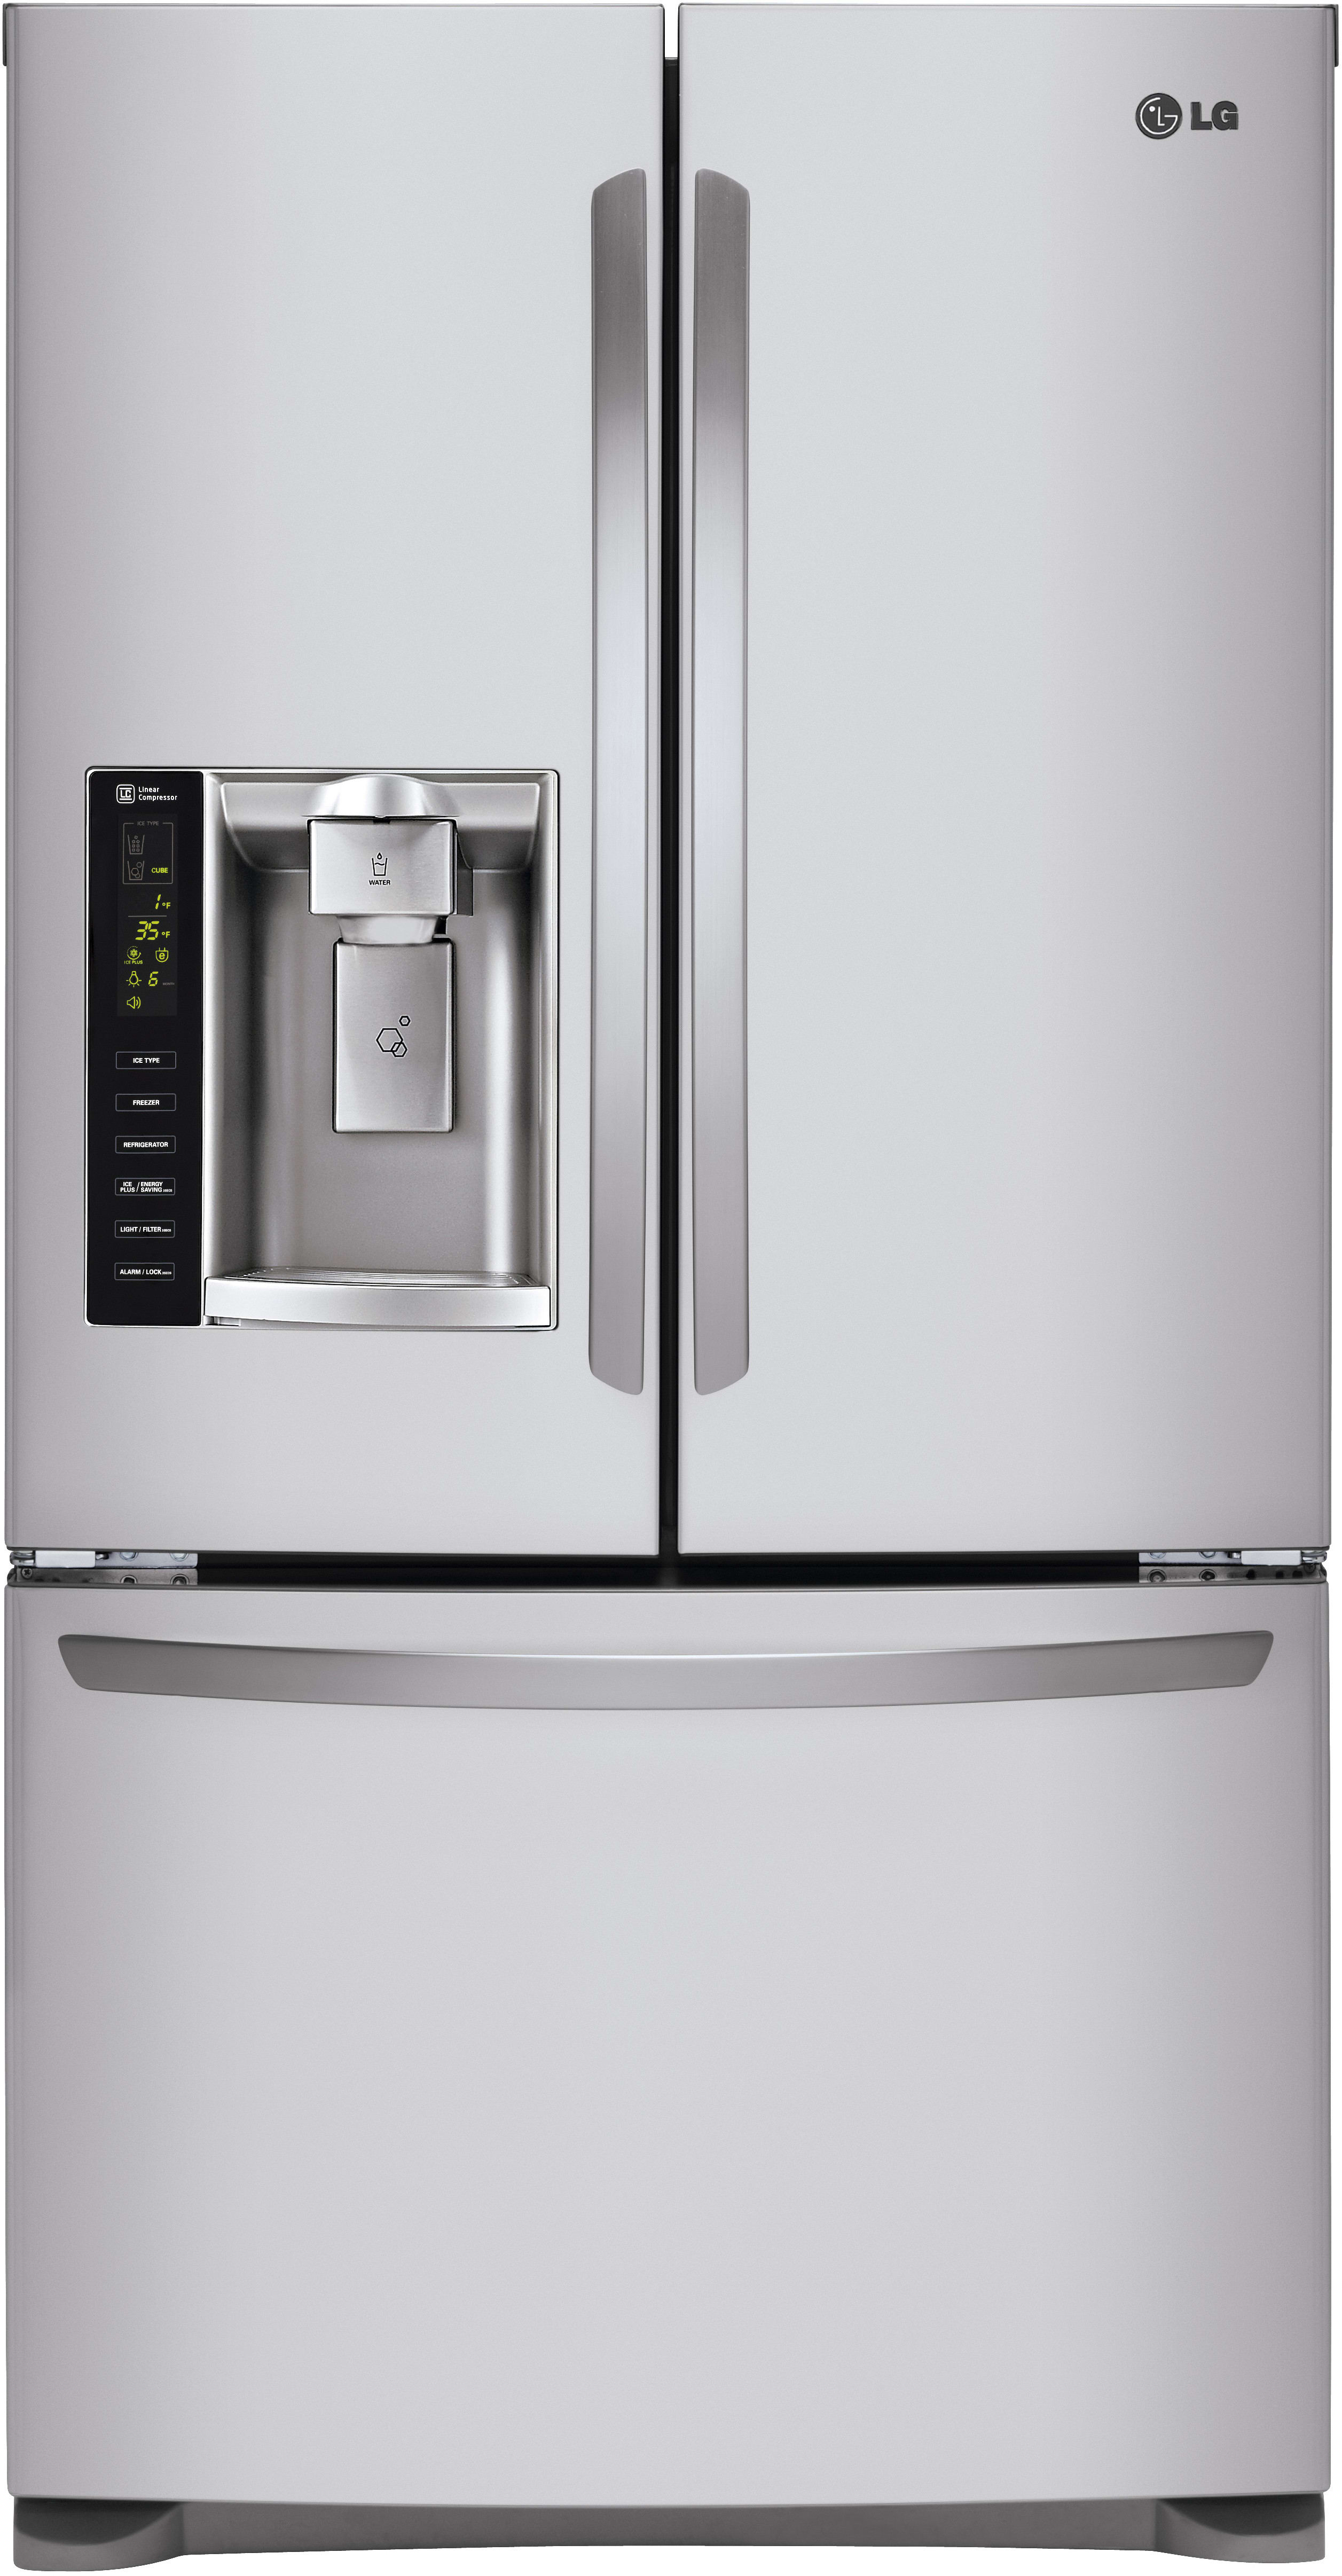 LG LFX25974ST 36 Inch French Door Refrigerator with Slim SpacePlus™ Ice System, Smart Cooling